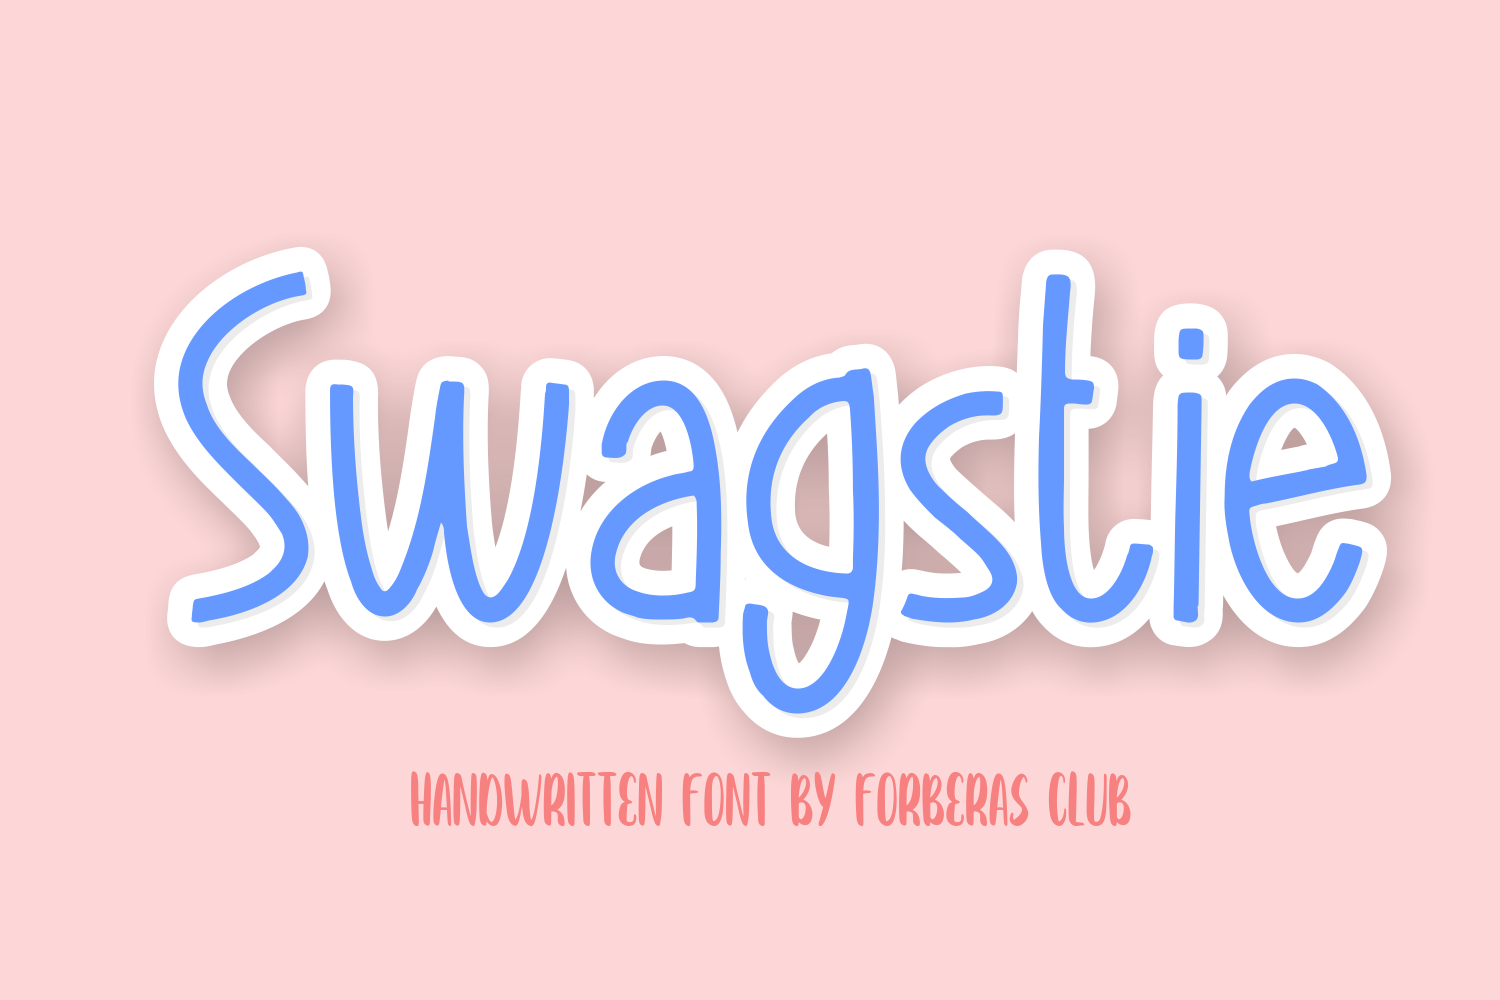 Swagstie Display Font